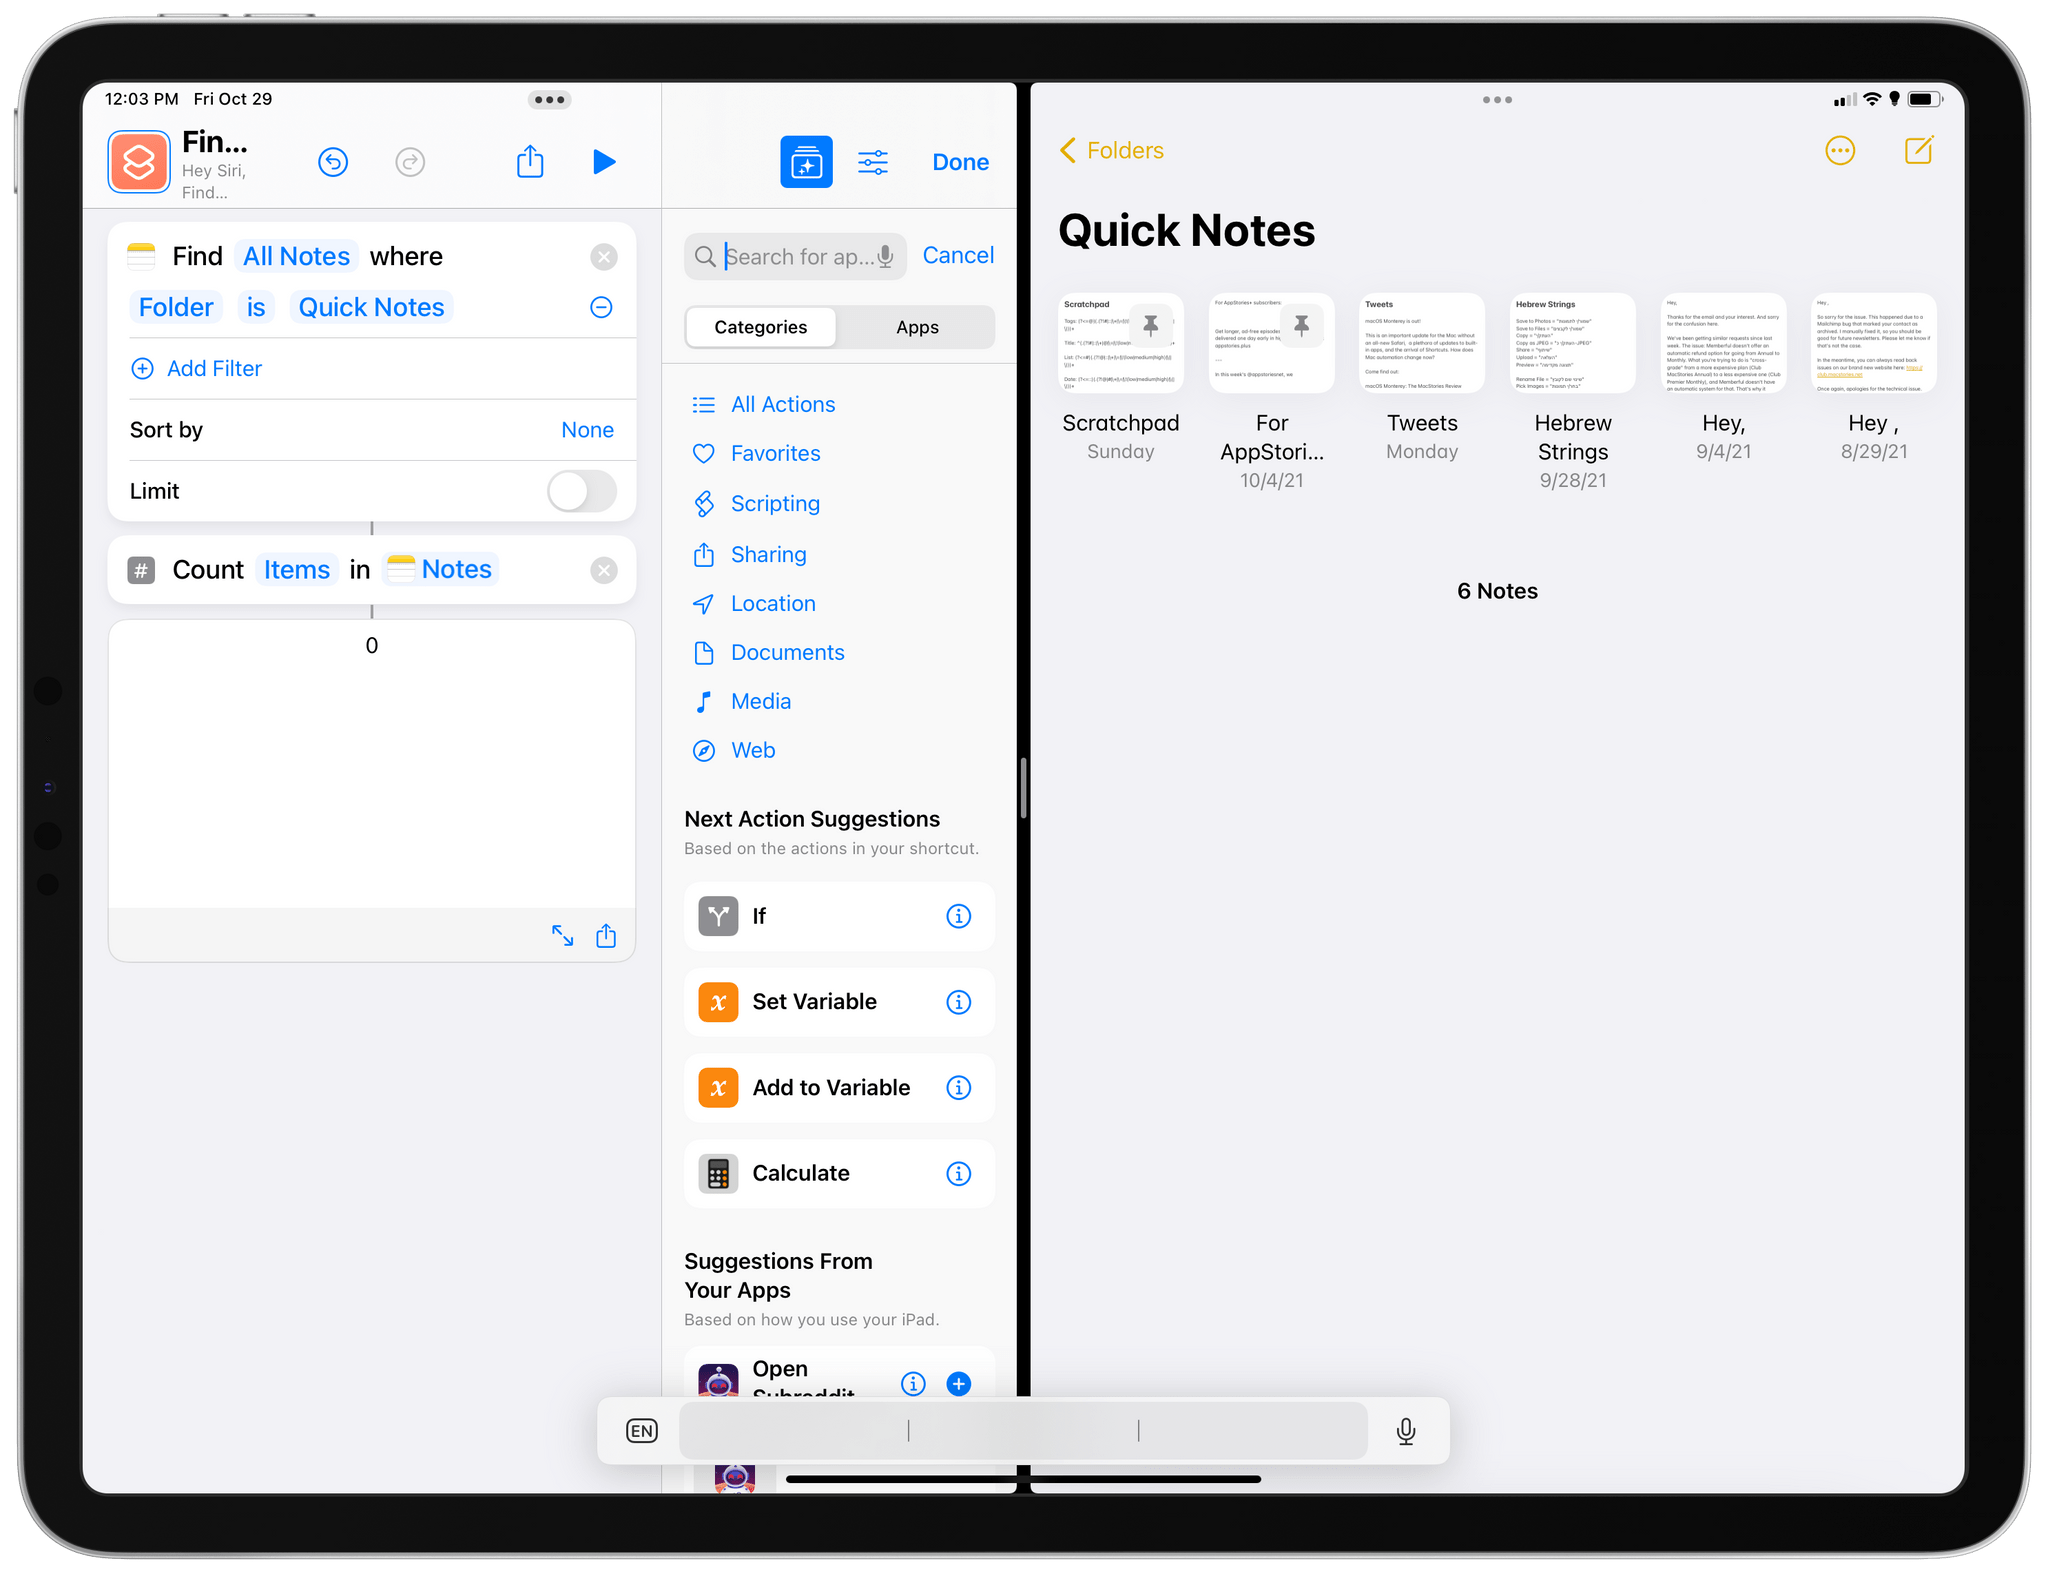 Shortcuts doesn't work with Quick Notes so far.